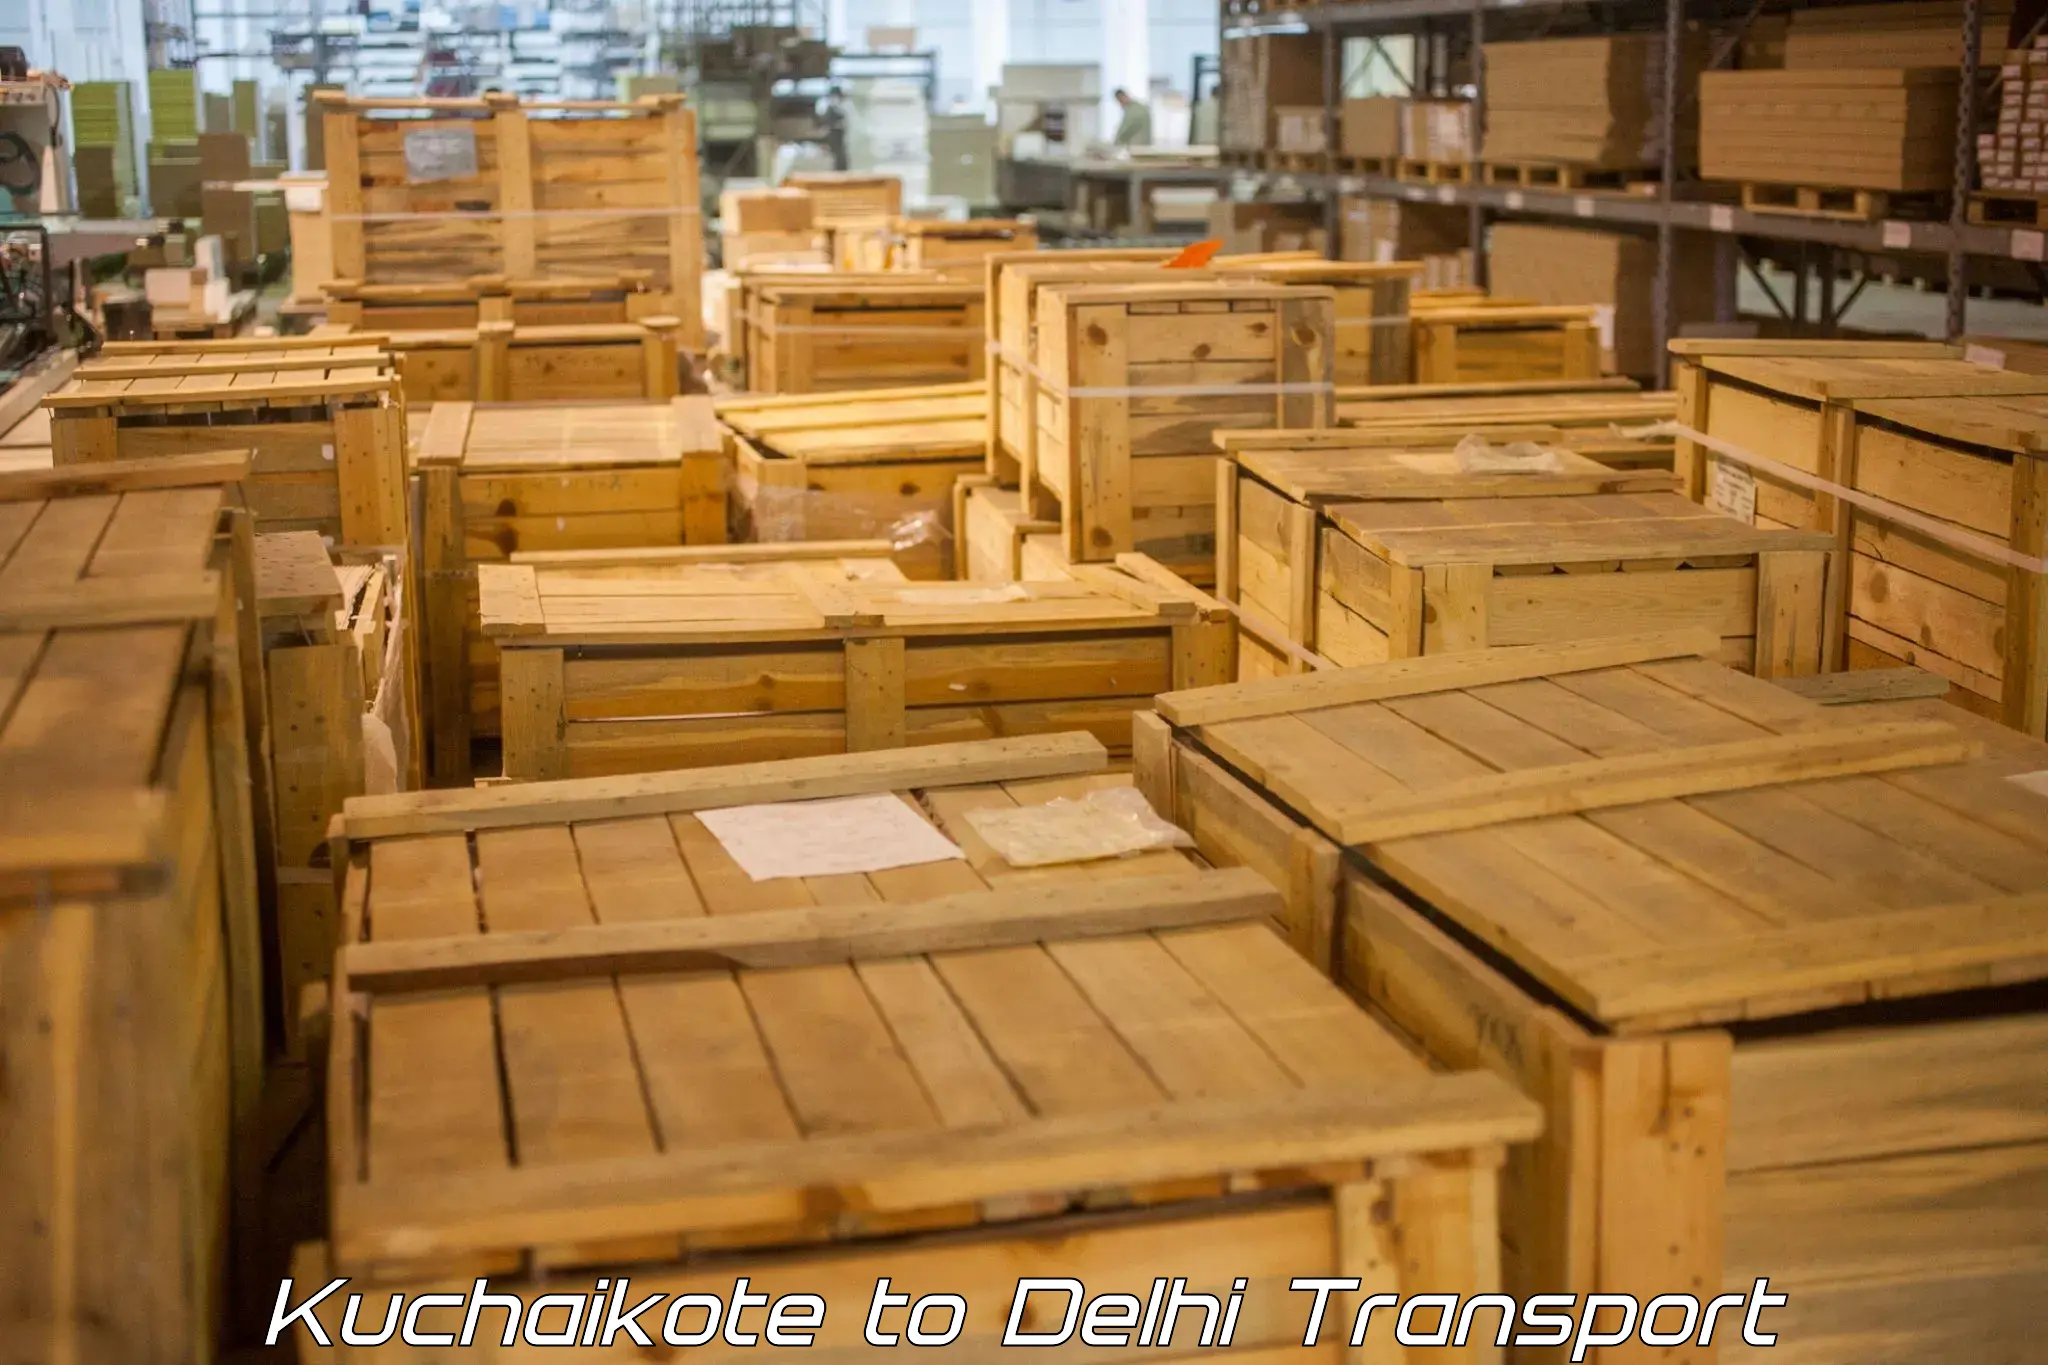 Daily parcel service transport Kuchaikote to NCR